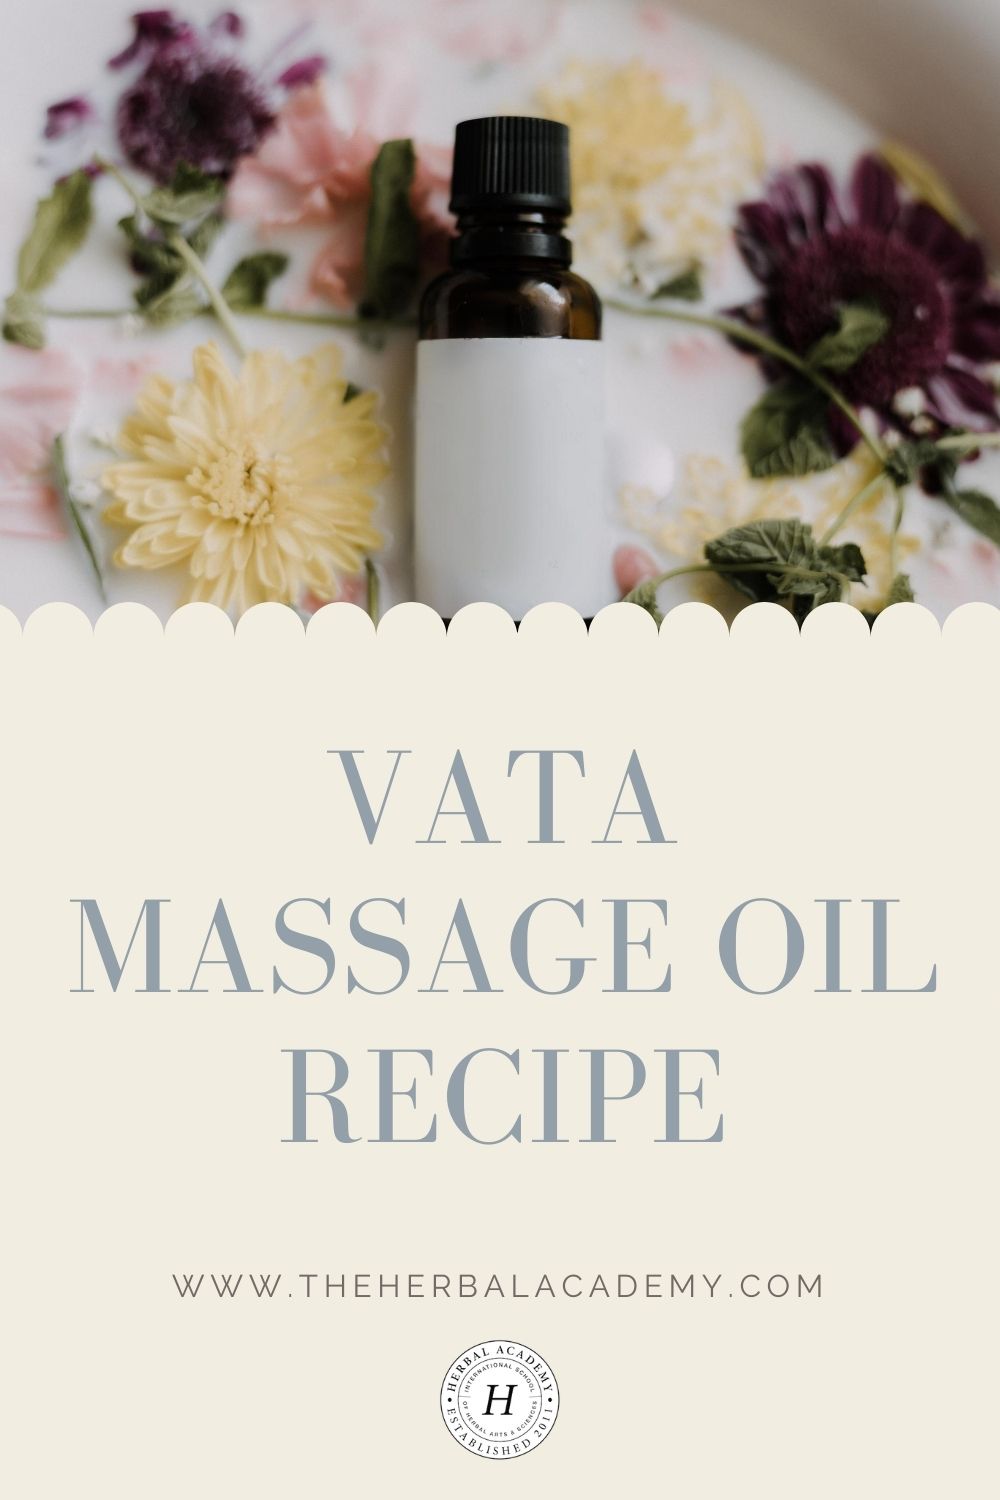 Vata Massage Oil Recipe (Fall and Early Winter) | Herbal Academy | This vata massage oil recipe features a sesame oil base and herbs with a warming, grounding energy, making it great for fall and winter. 